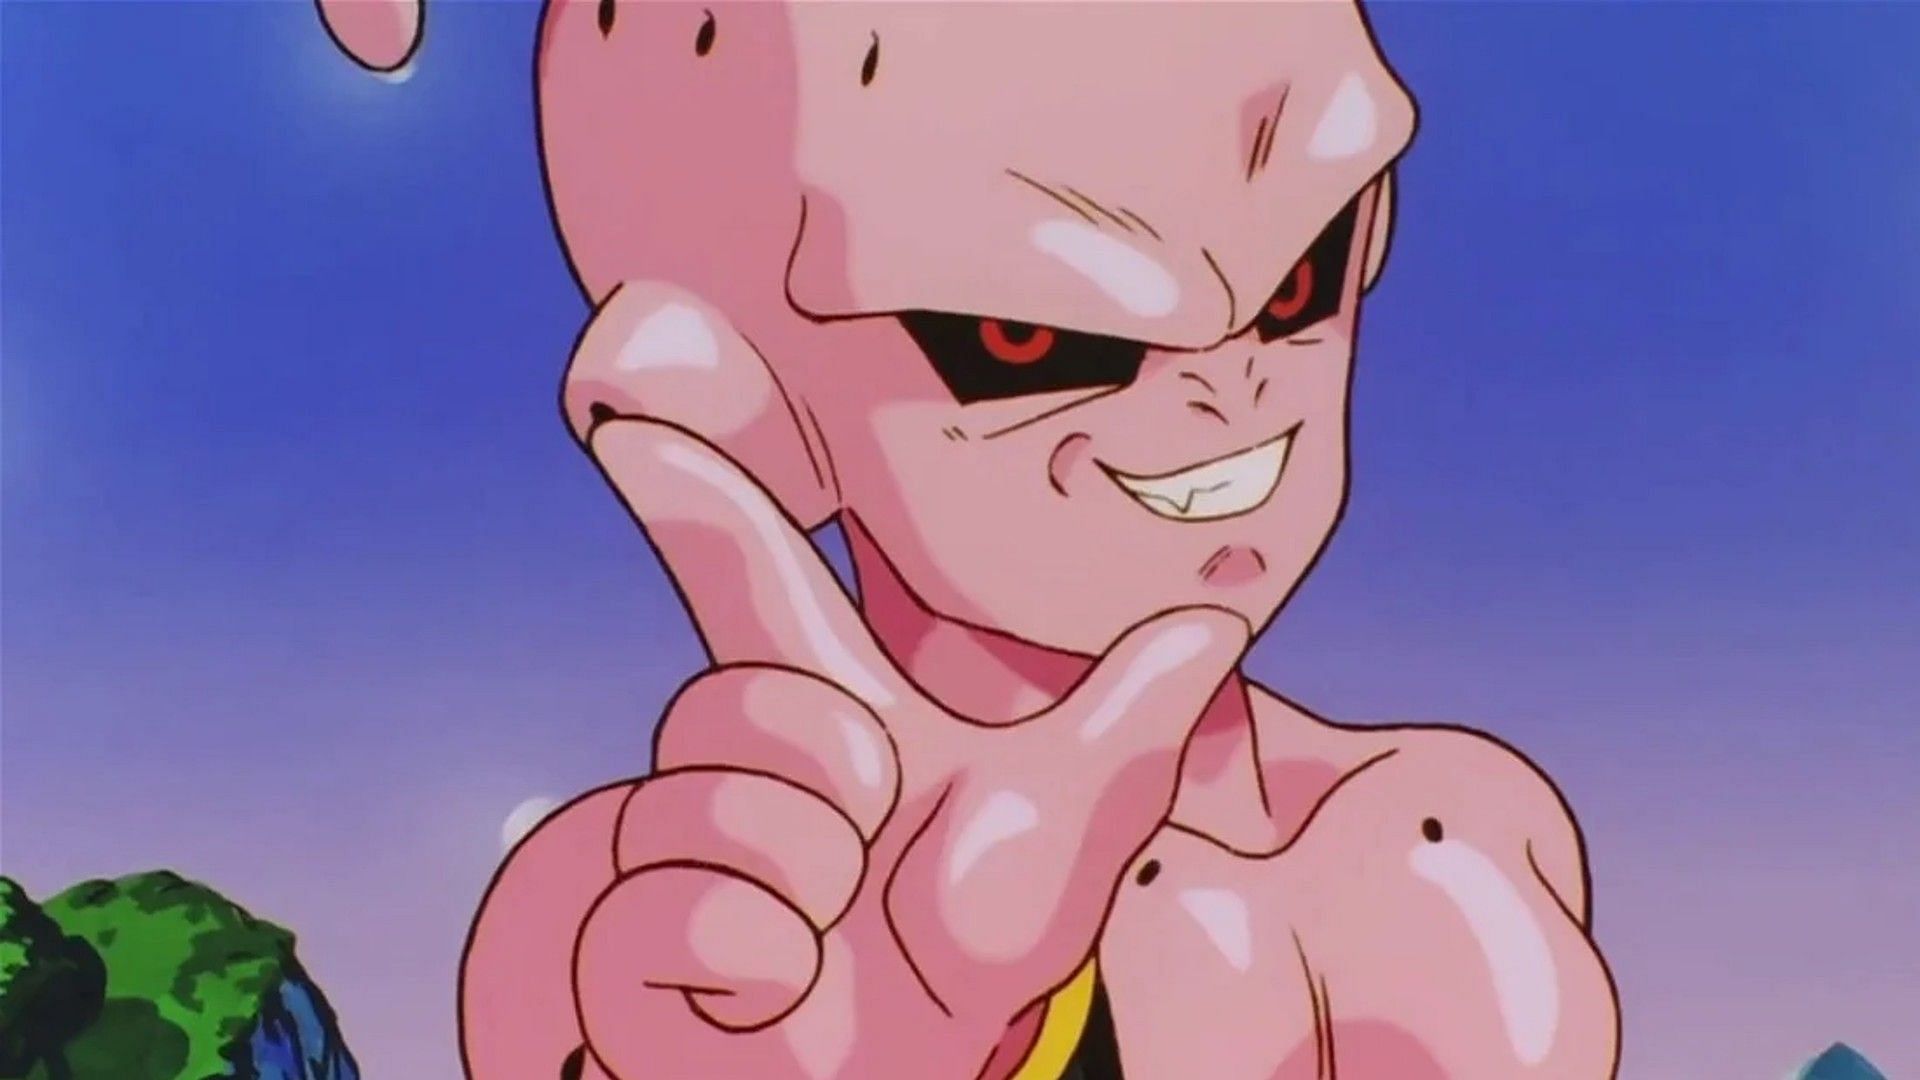 Buu as seen in the show (Image via Toei Animation)